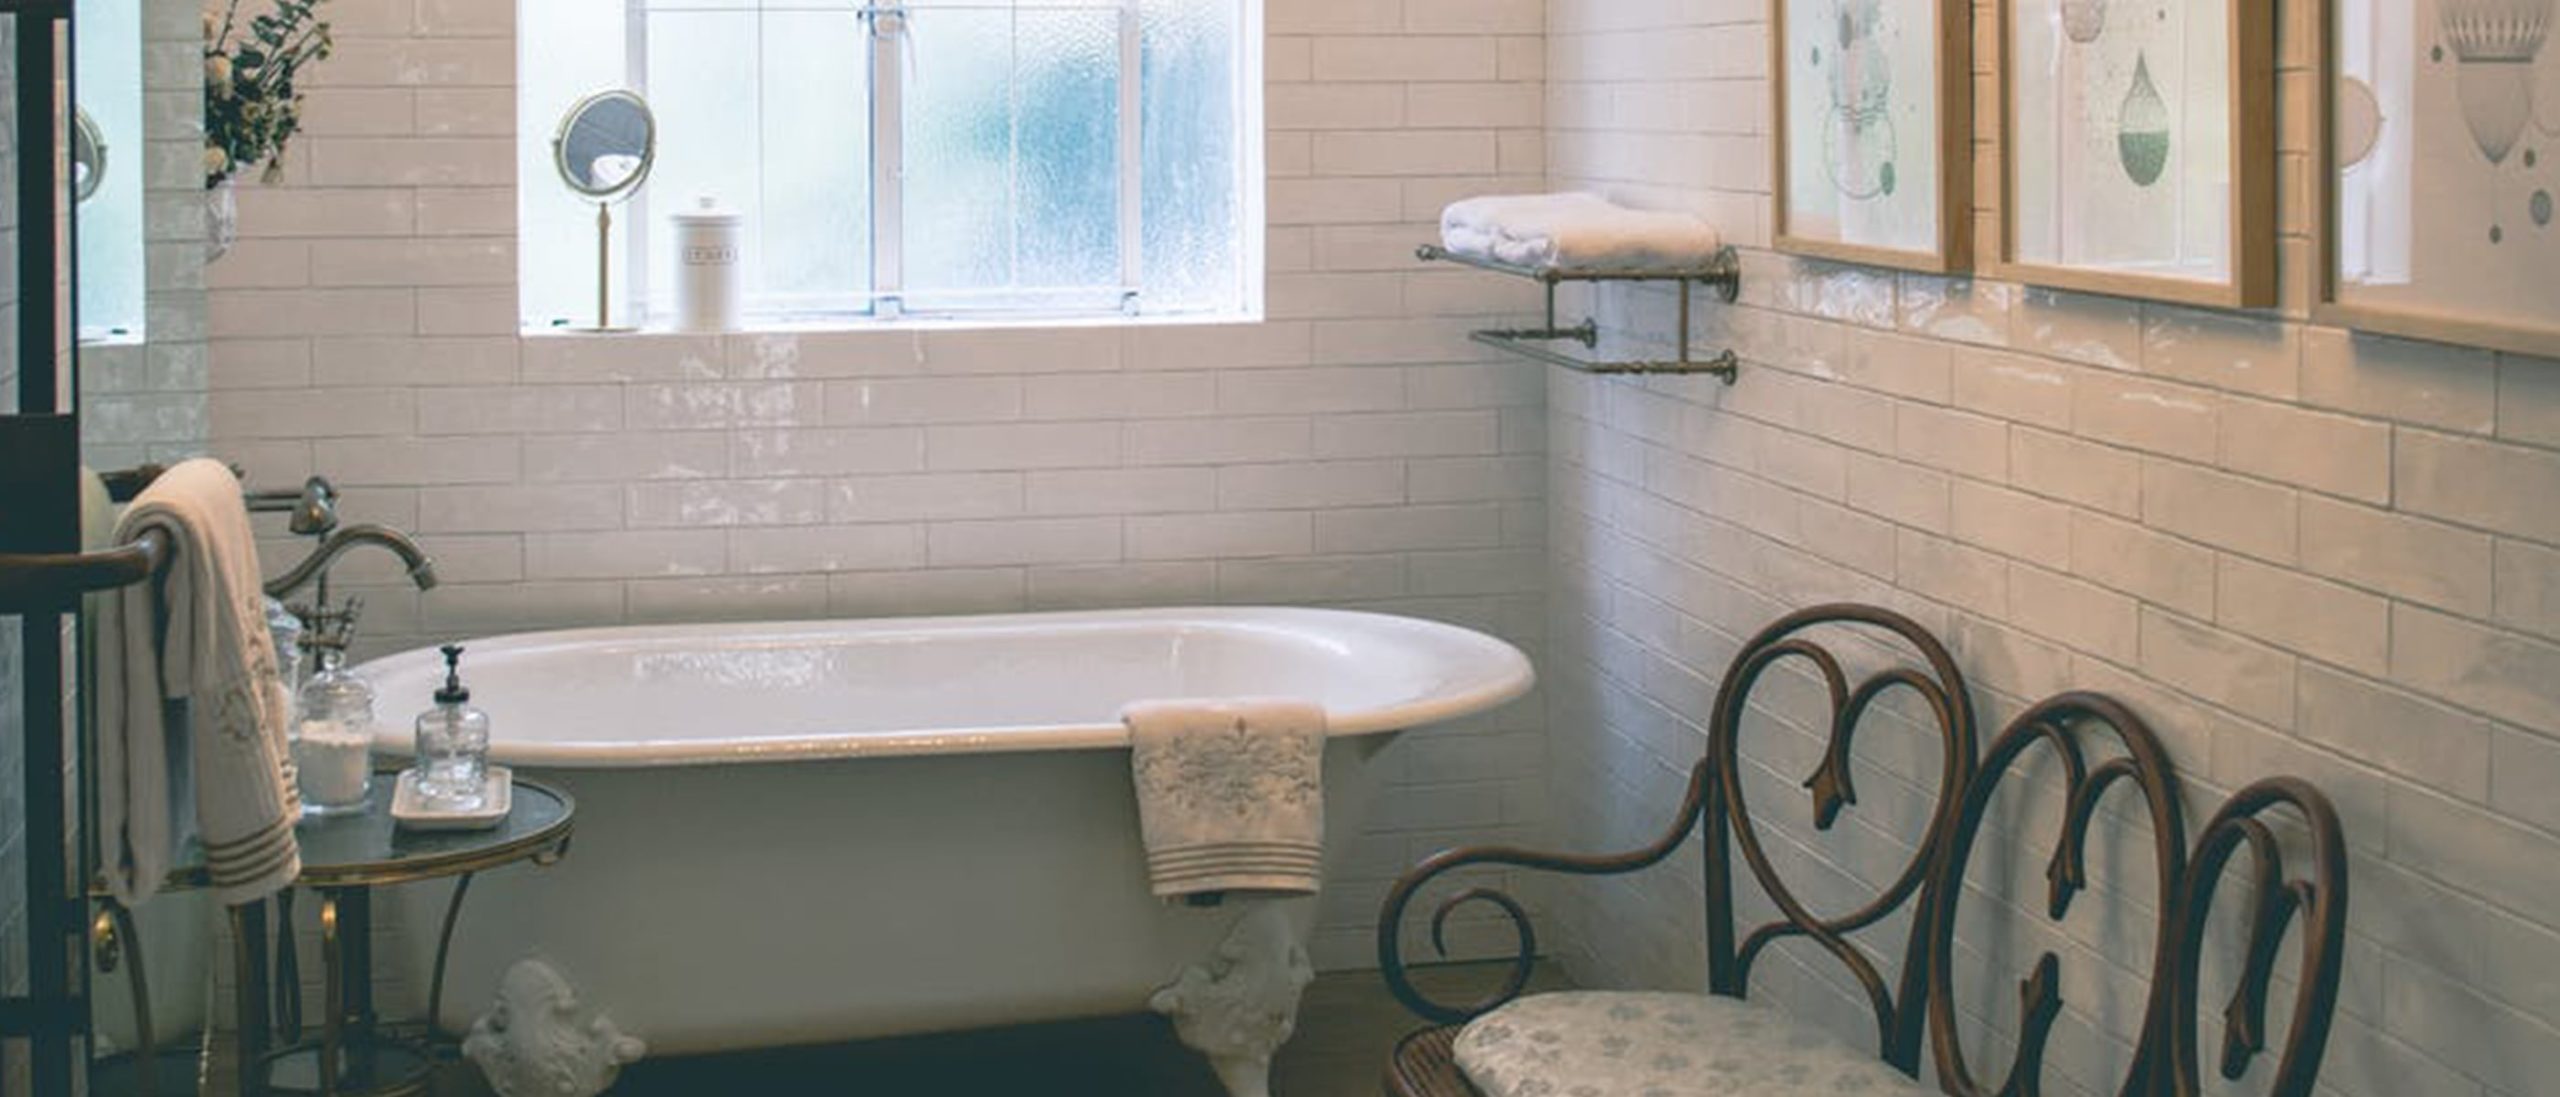 clawfoot bathtub in white tile room with vintage seats and tile